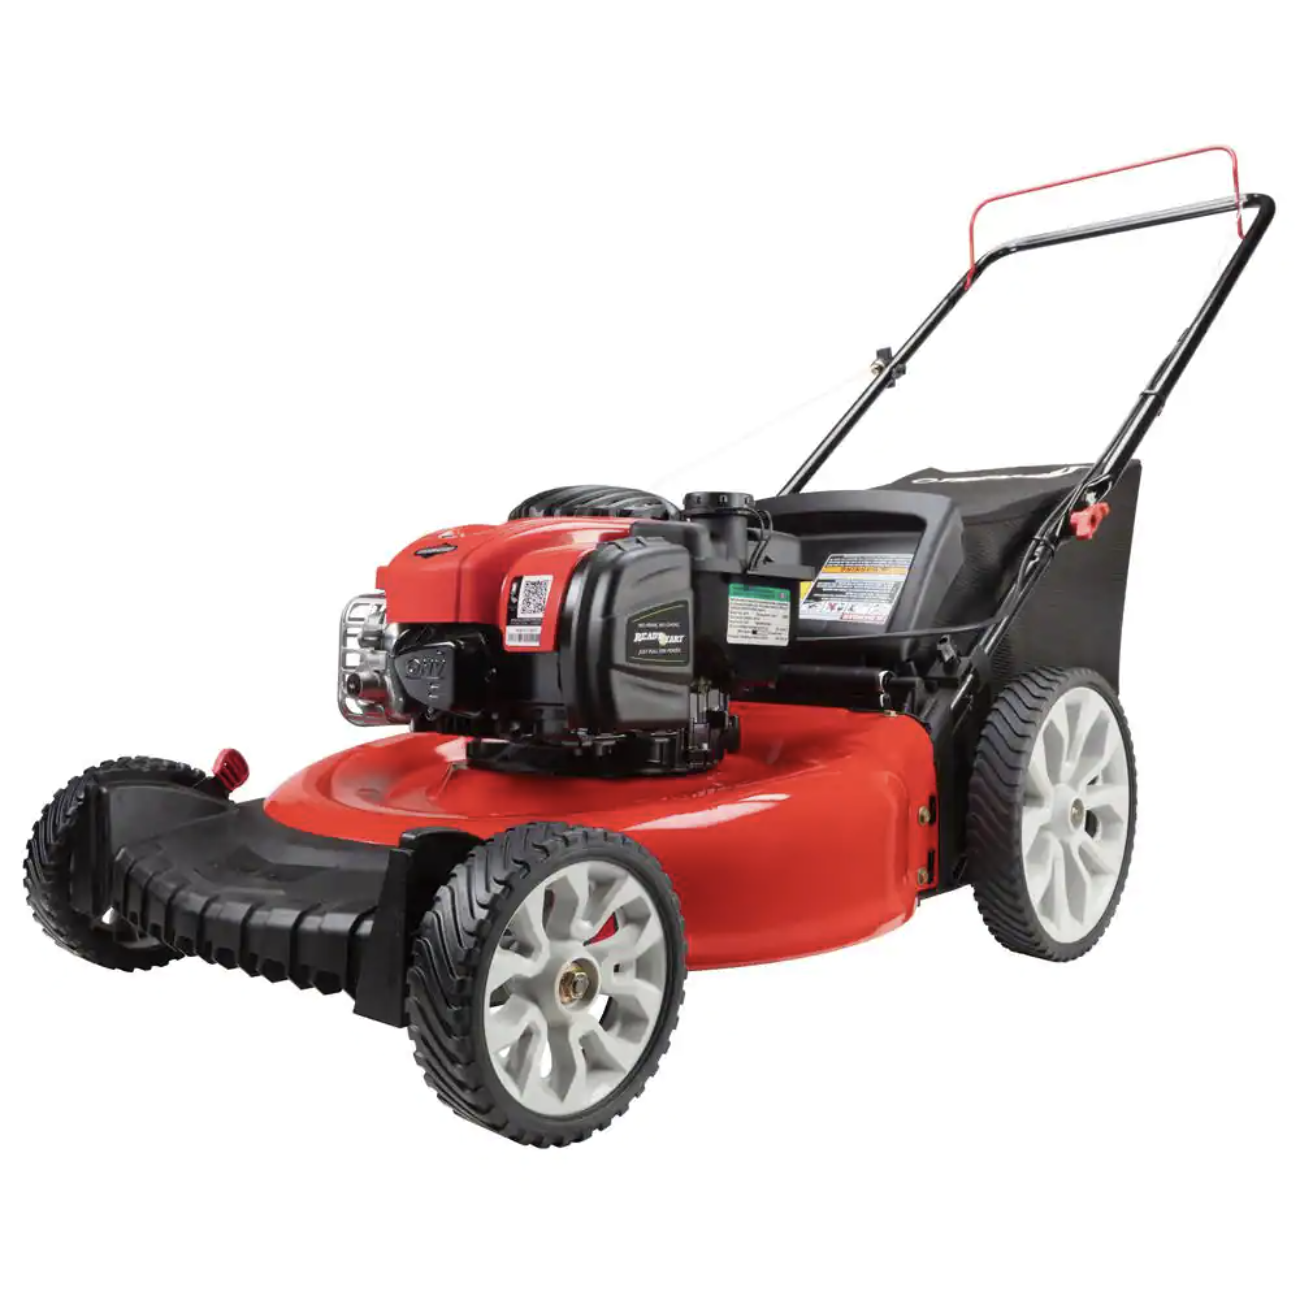 Troy-Bilt 21in. 140cc Briggs and Stratton Gas Push Lawn Mower with Rear bag and Mulching Kit Included💝 Last Day For Clearance